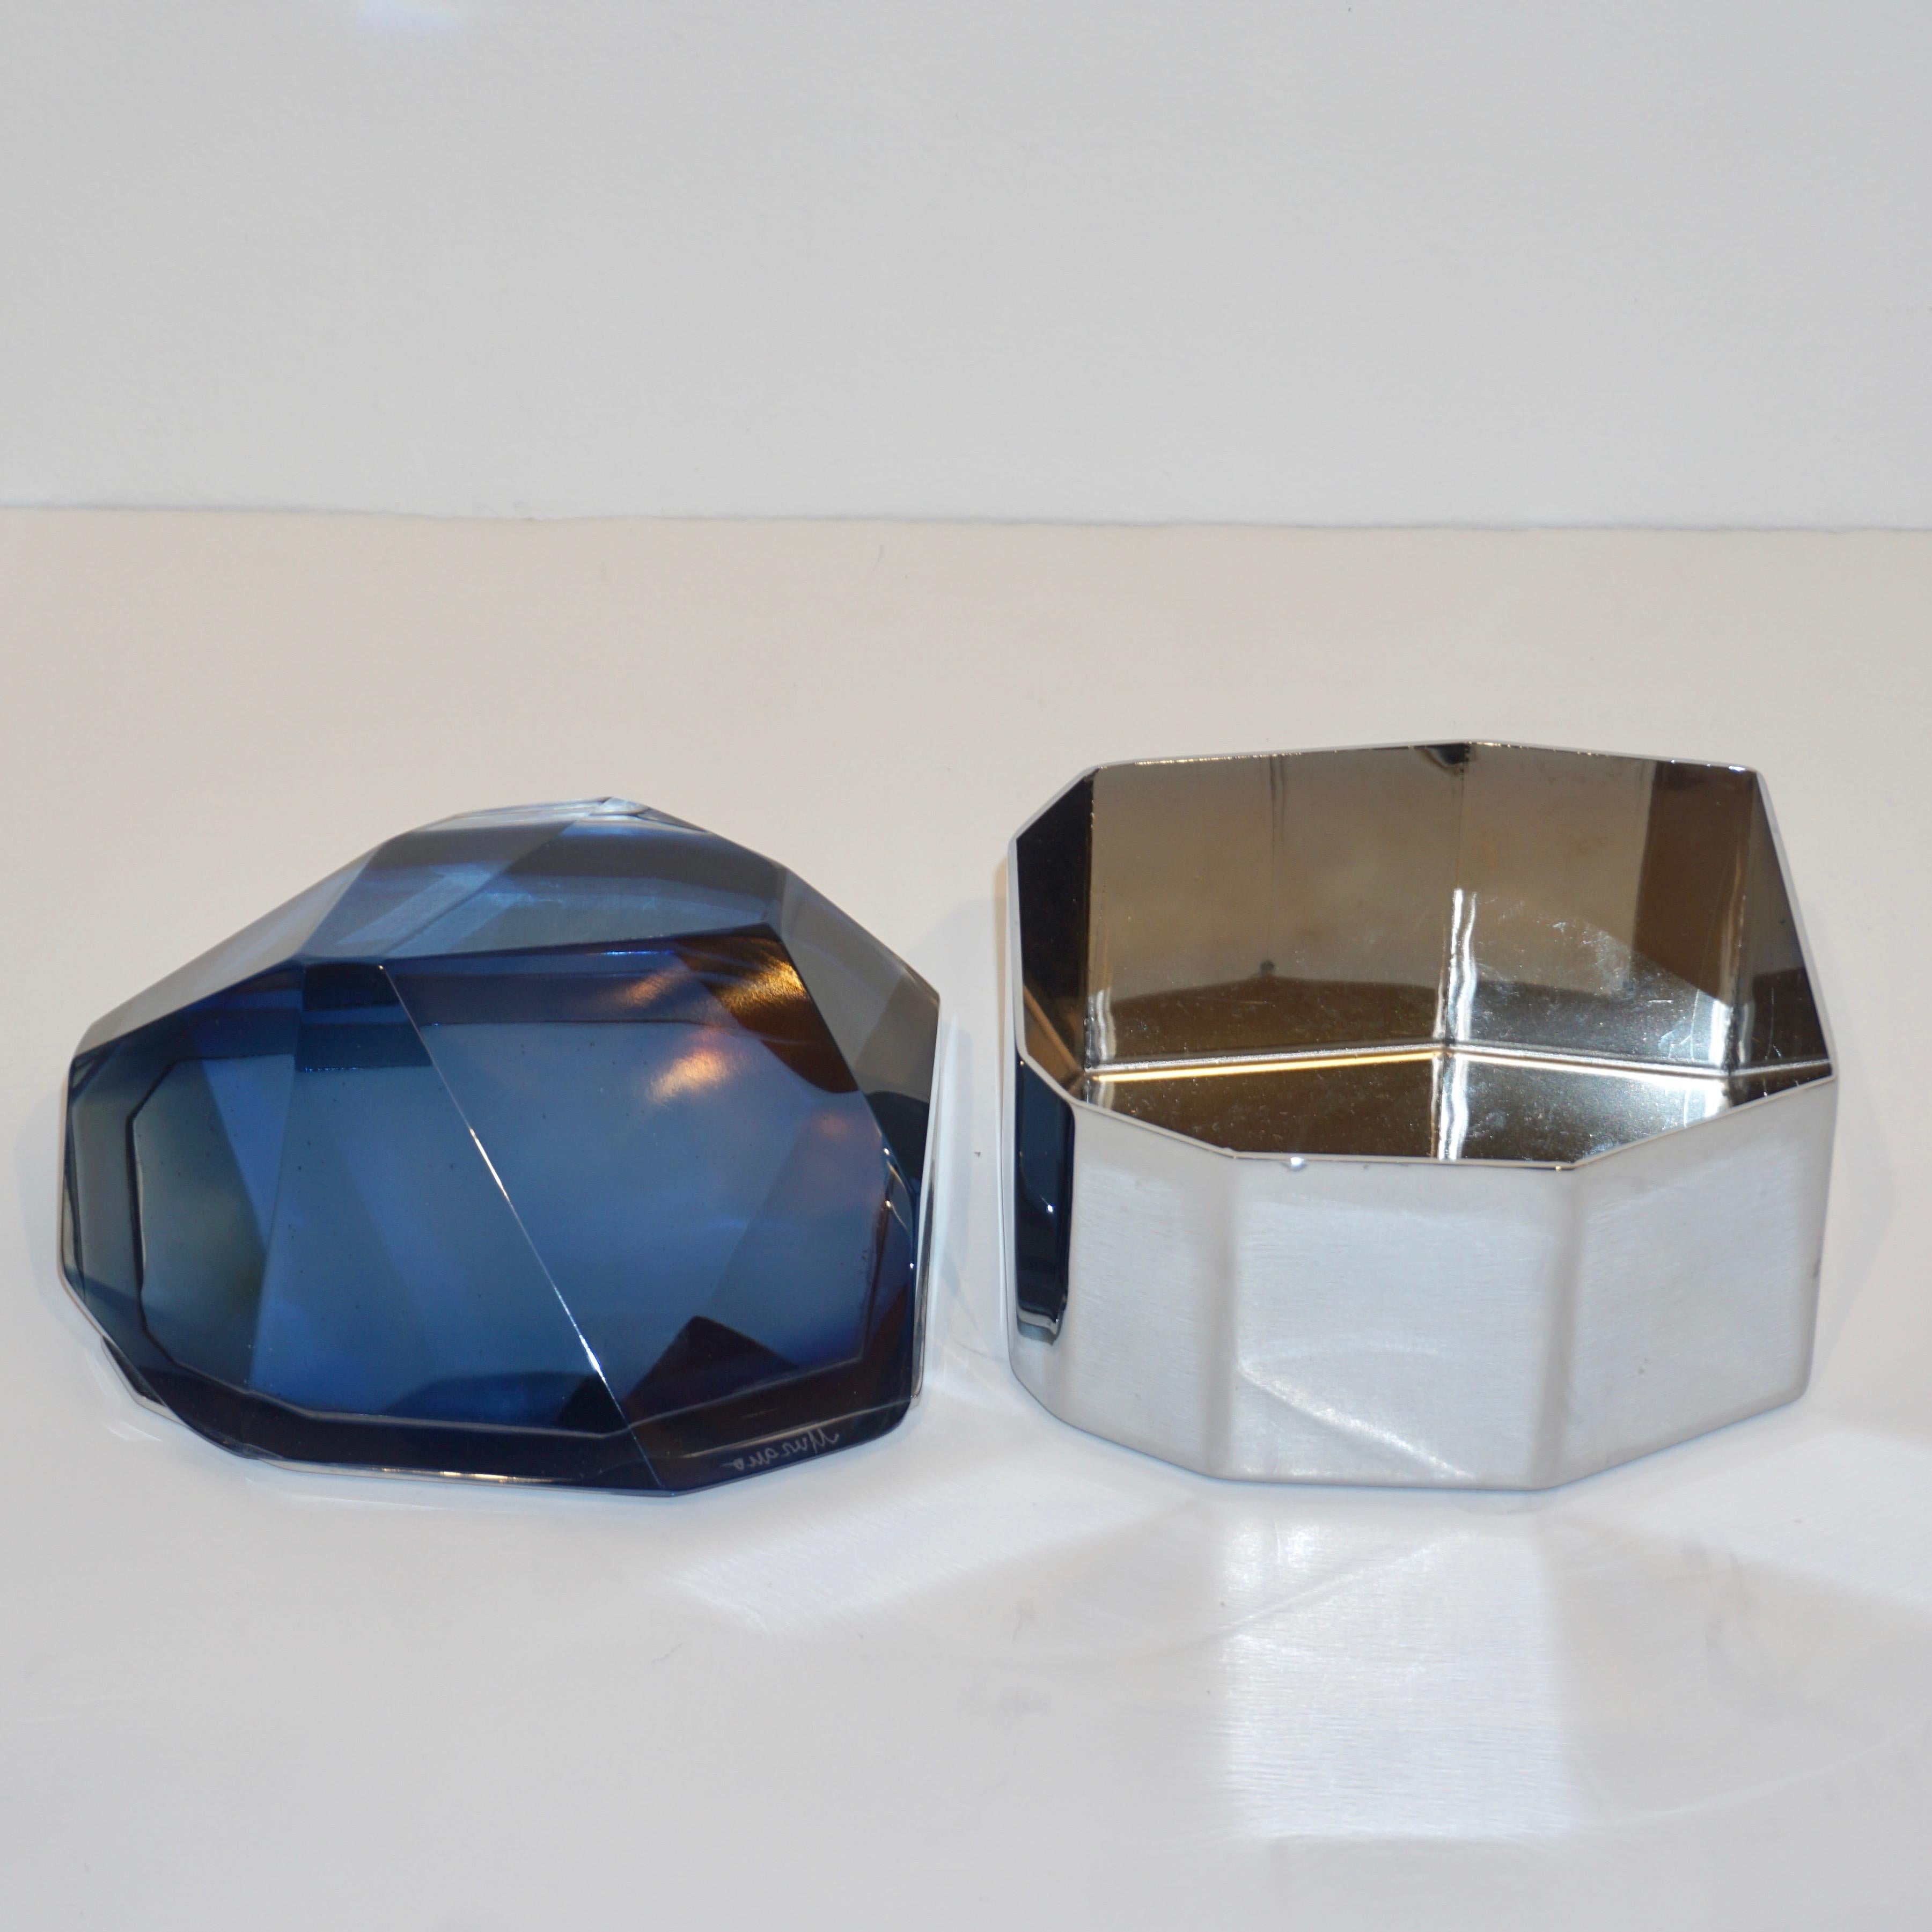 Italian contemporary organic casket, entirely handcrafted, by Toso Vetri d'Arte (signed Murano) with a freeform geometric nickel case embellished by a smoked midnight blue cover in blown rock Murano glass, handcut like a diamond. Available in other